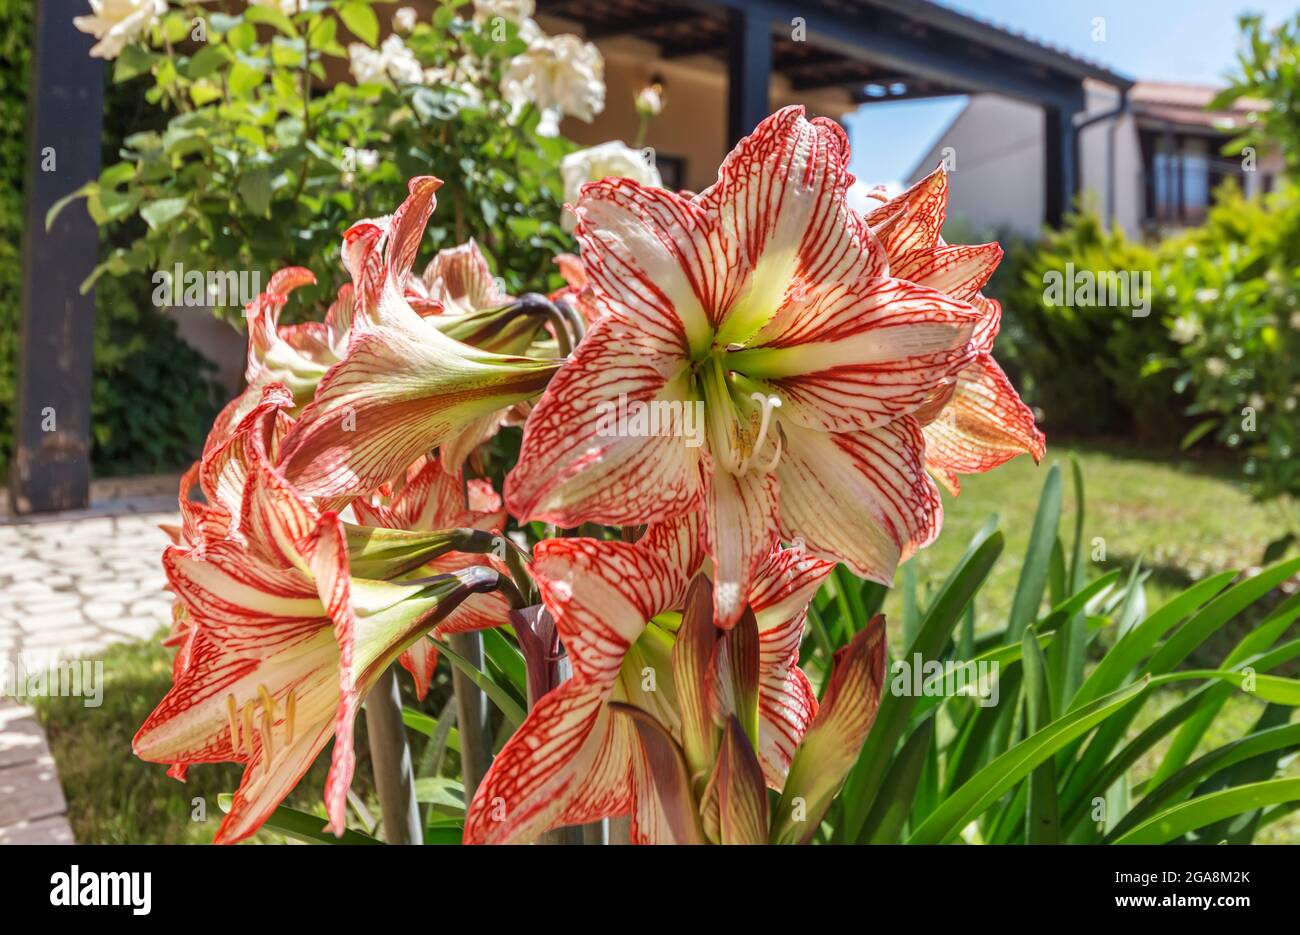 Hippeastrum Amaryllis red white flowers in the garden Stock Photo